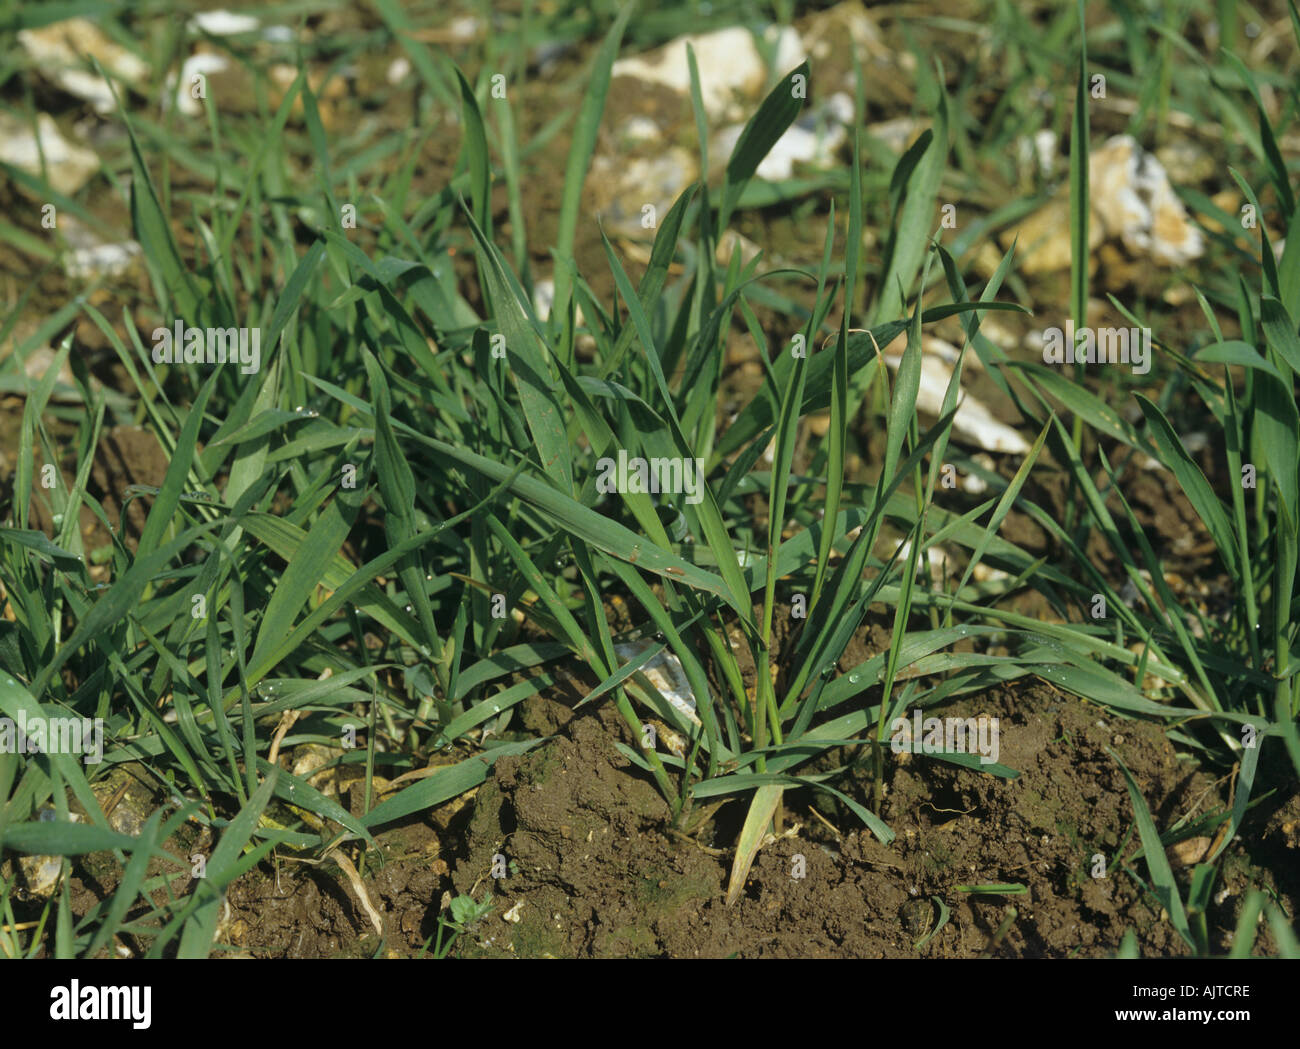 Couch Agropyron repens shoot growing among young wheat seedlings Stock Photo